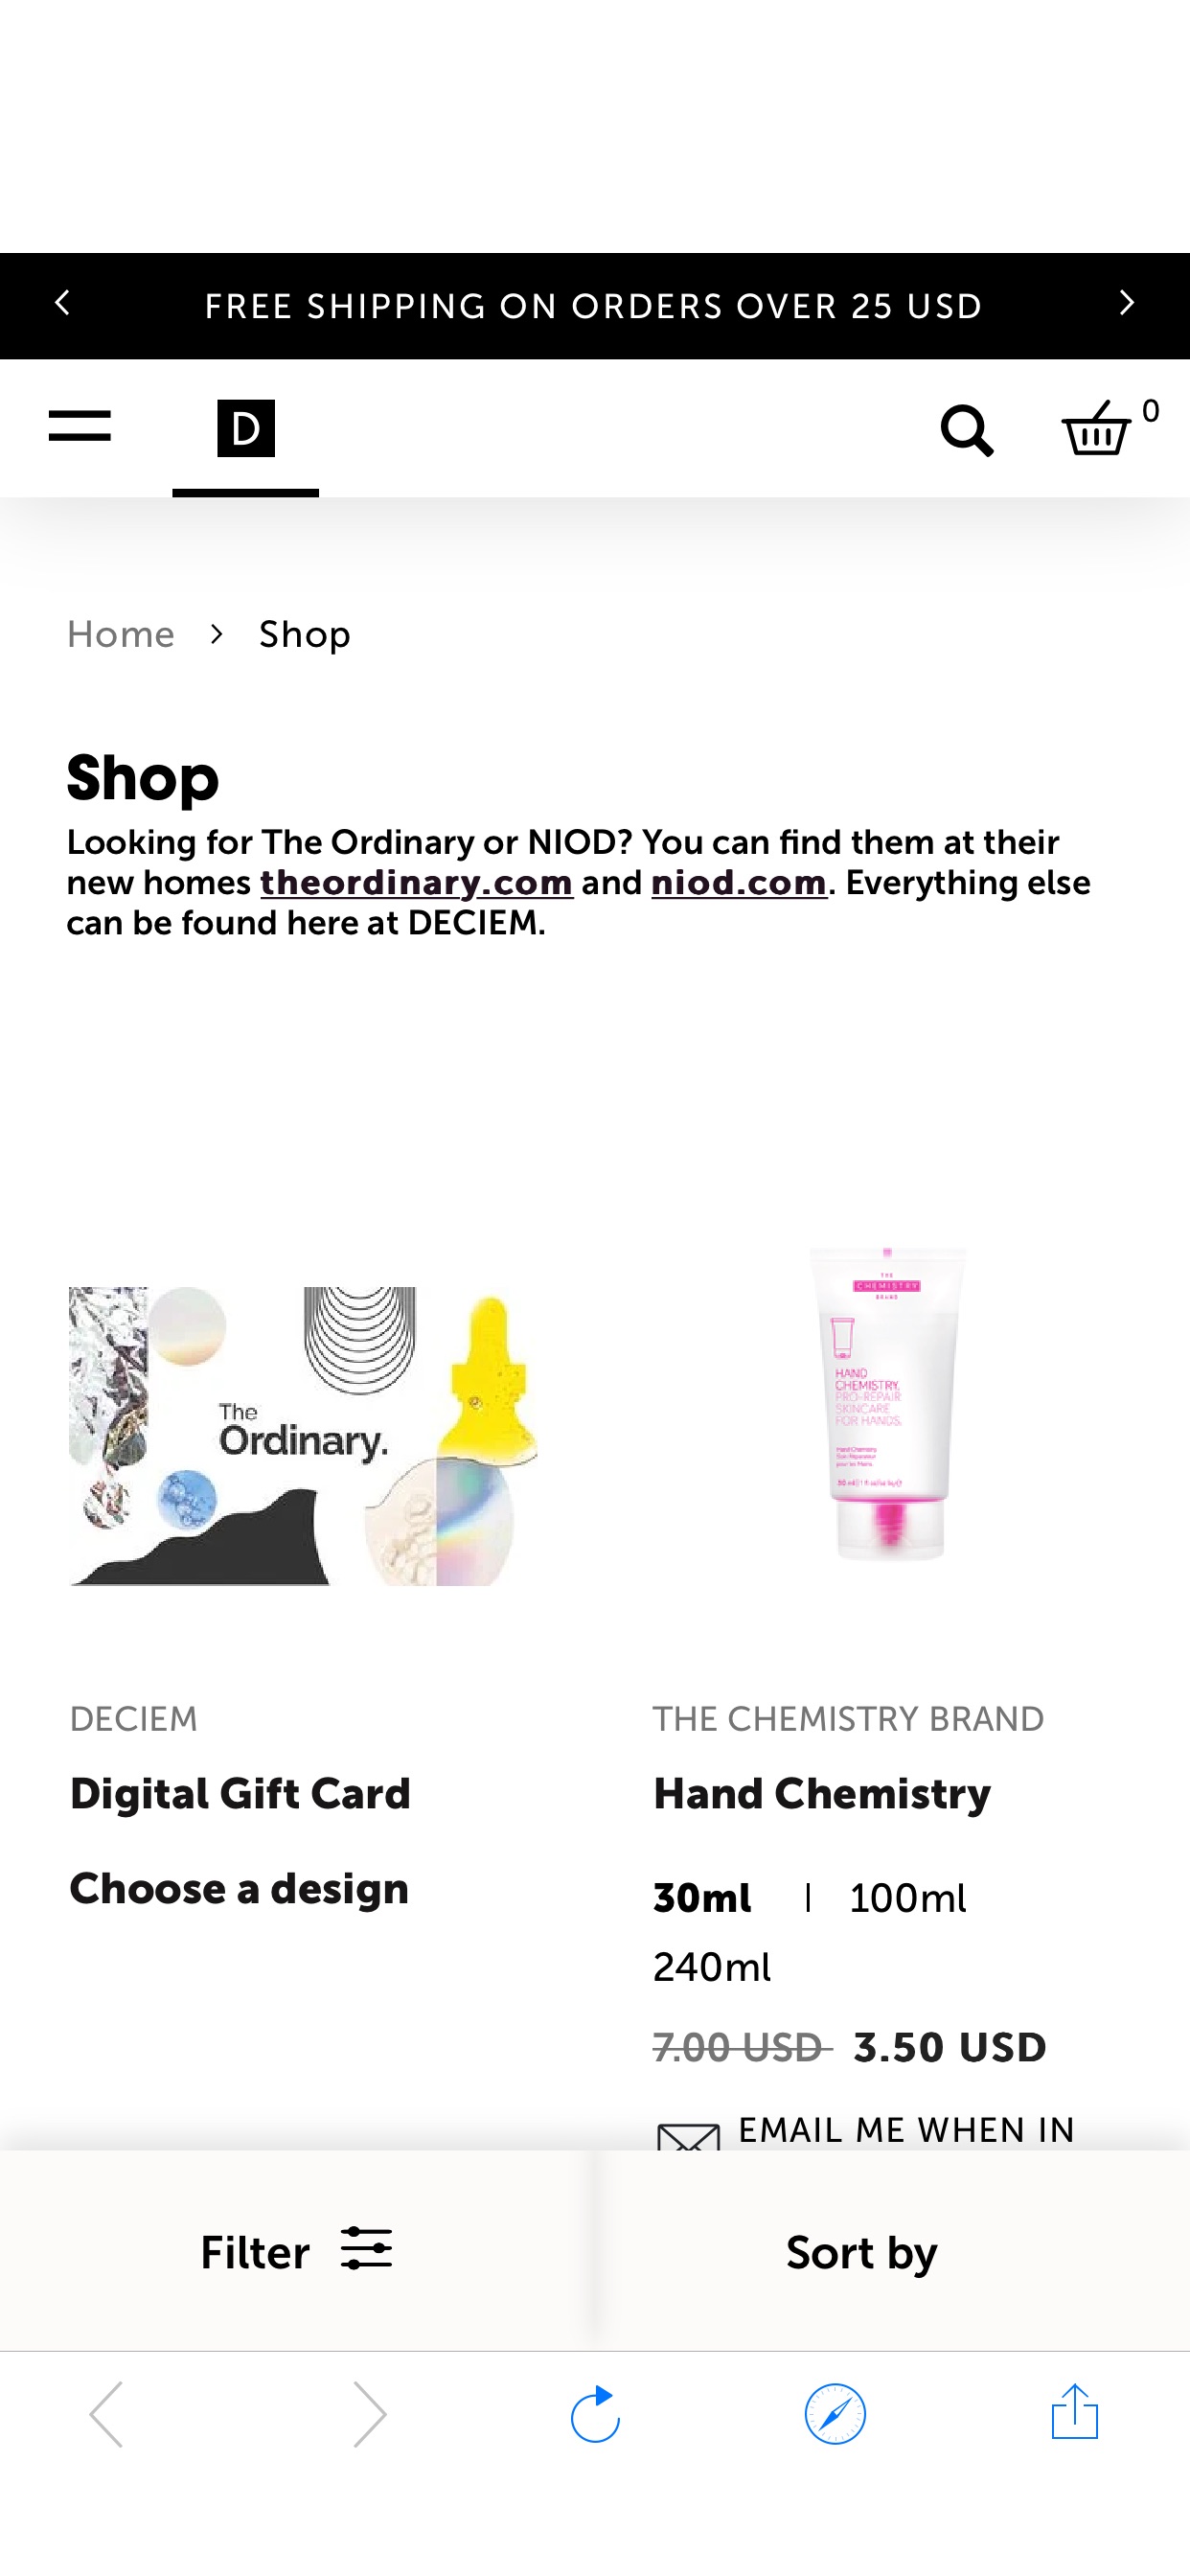 Science-backed formulas from The Chemistry Brand, Hylamide, and Abnomaly are still available - and are now 50% off 五折 | DECIEM